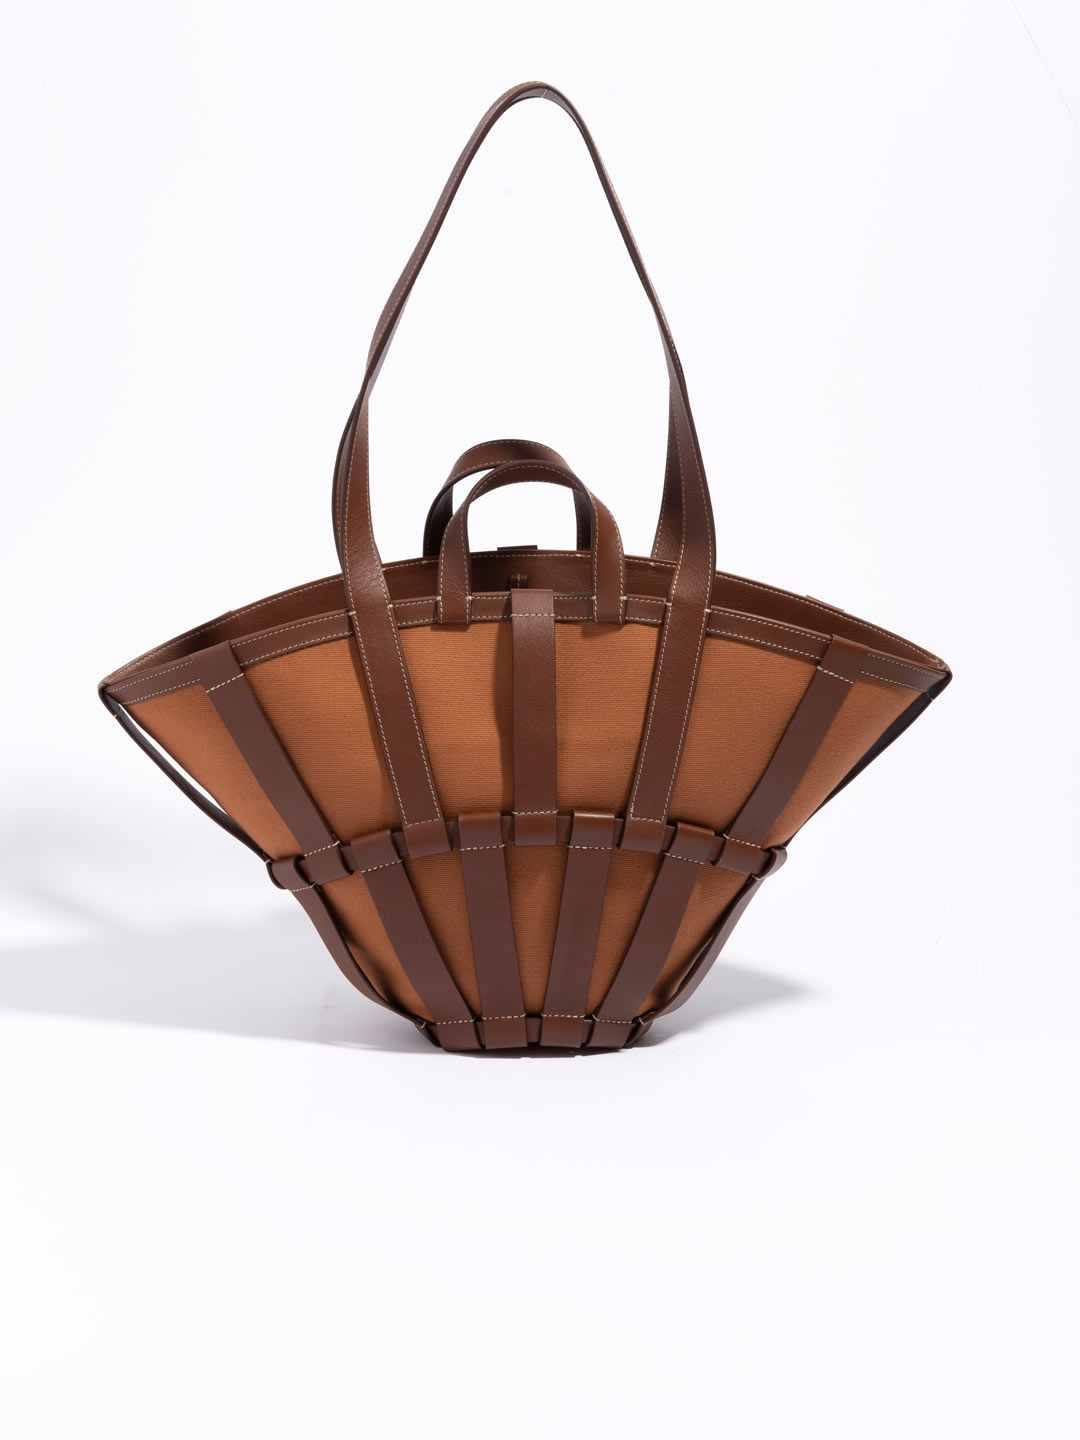 Encant Caged Leather Canvas Tote Bag - Light Brown